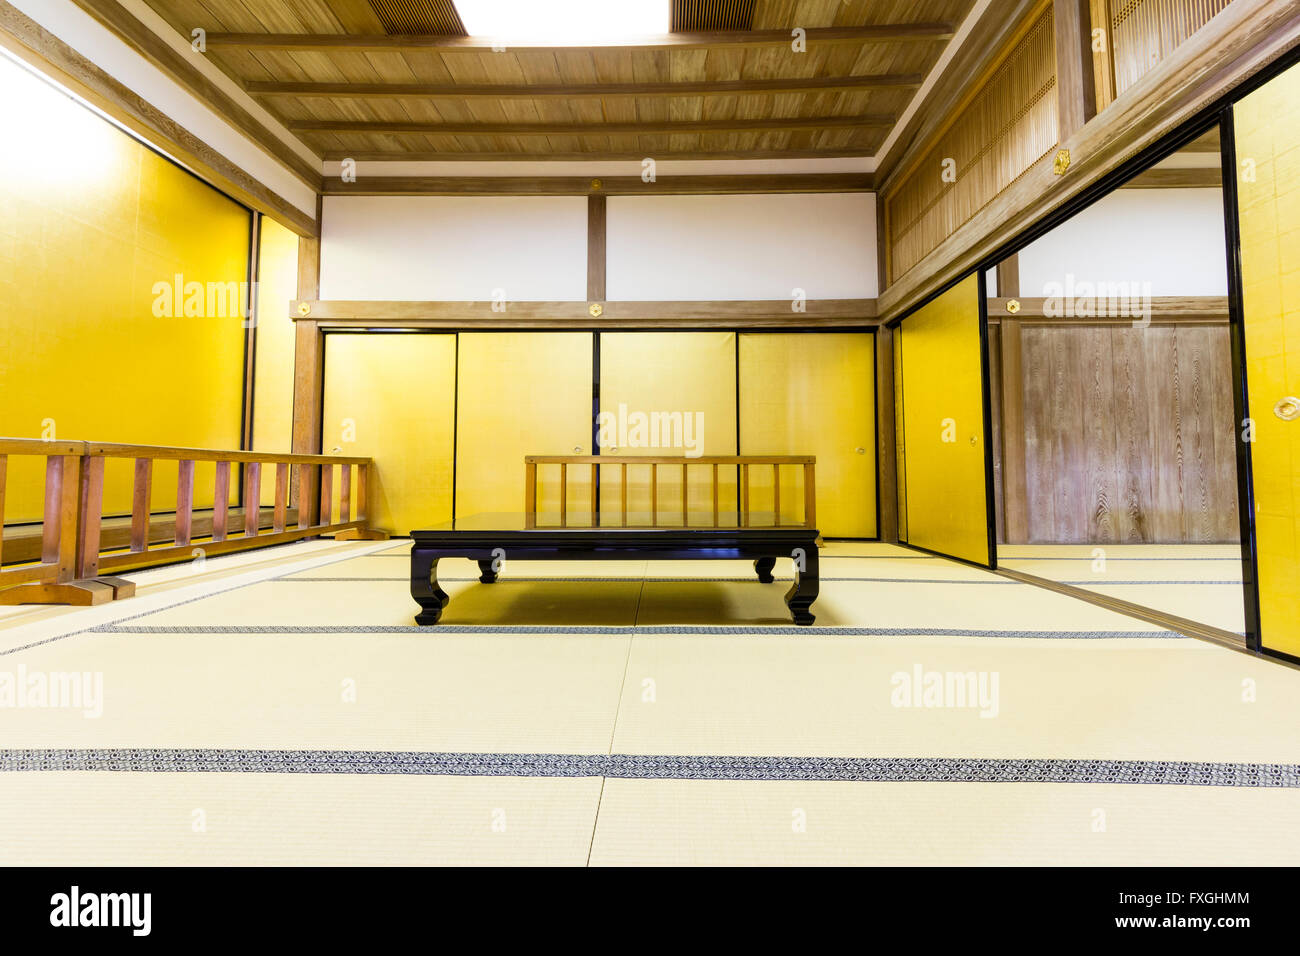 Japan, Kumamoto Castle. Interior room, used for Japanese tea ceremony, in the Sukiyamaru two story tower, yagura. Low table in middle on tatami mats. Stock Photo